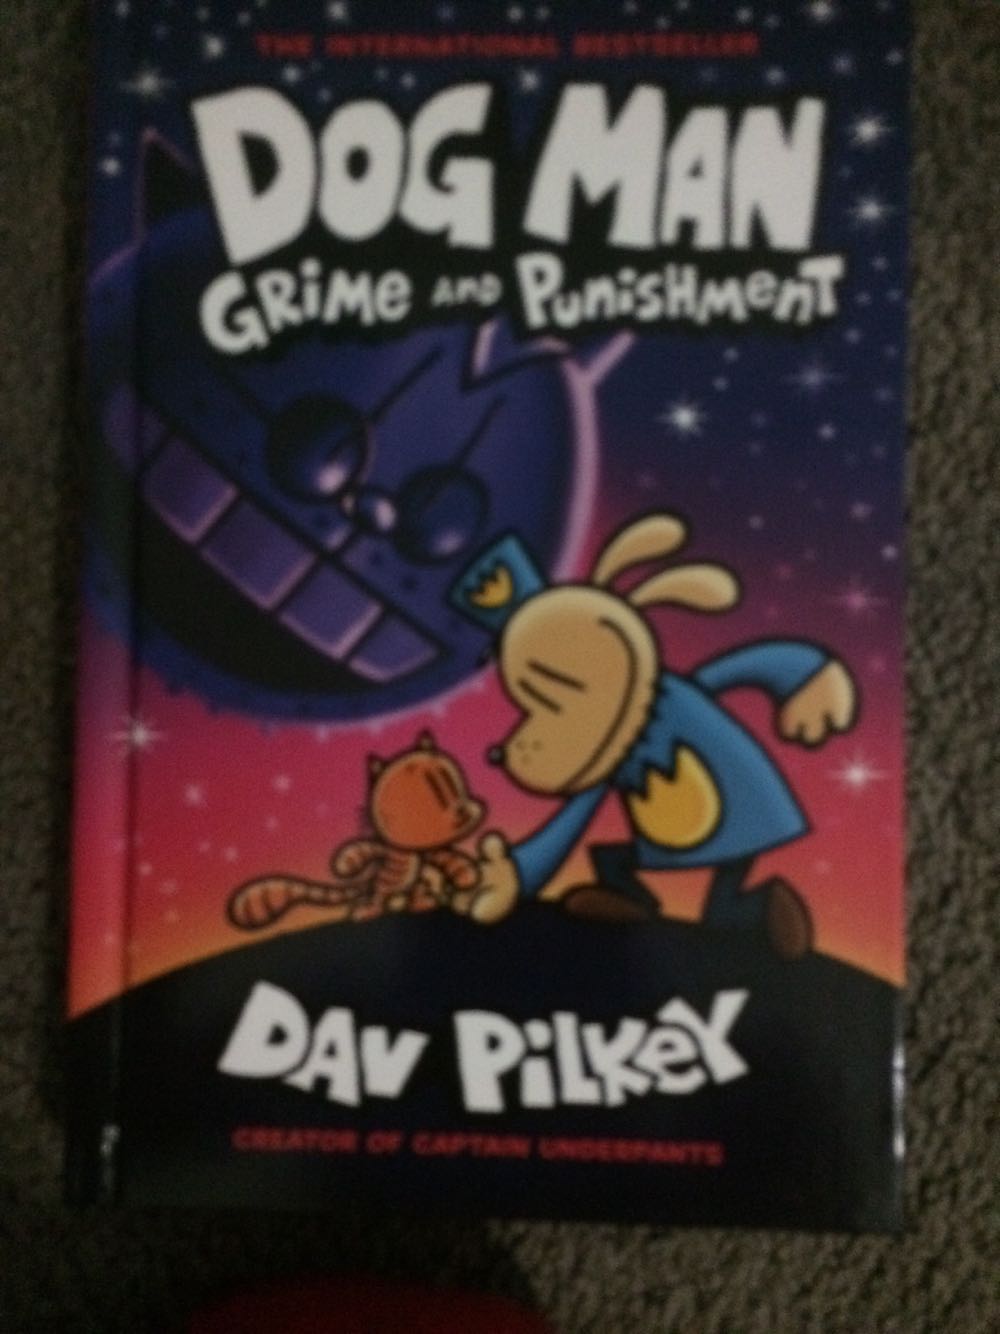 Dog Man #9: Grime and Punishment - Dav Pilkey (Graphix - Hardcover) book collectible [Barcode 9781338535624] - Main Image 1